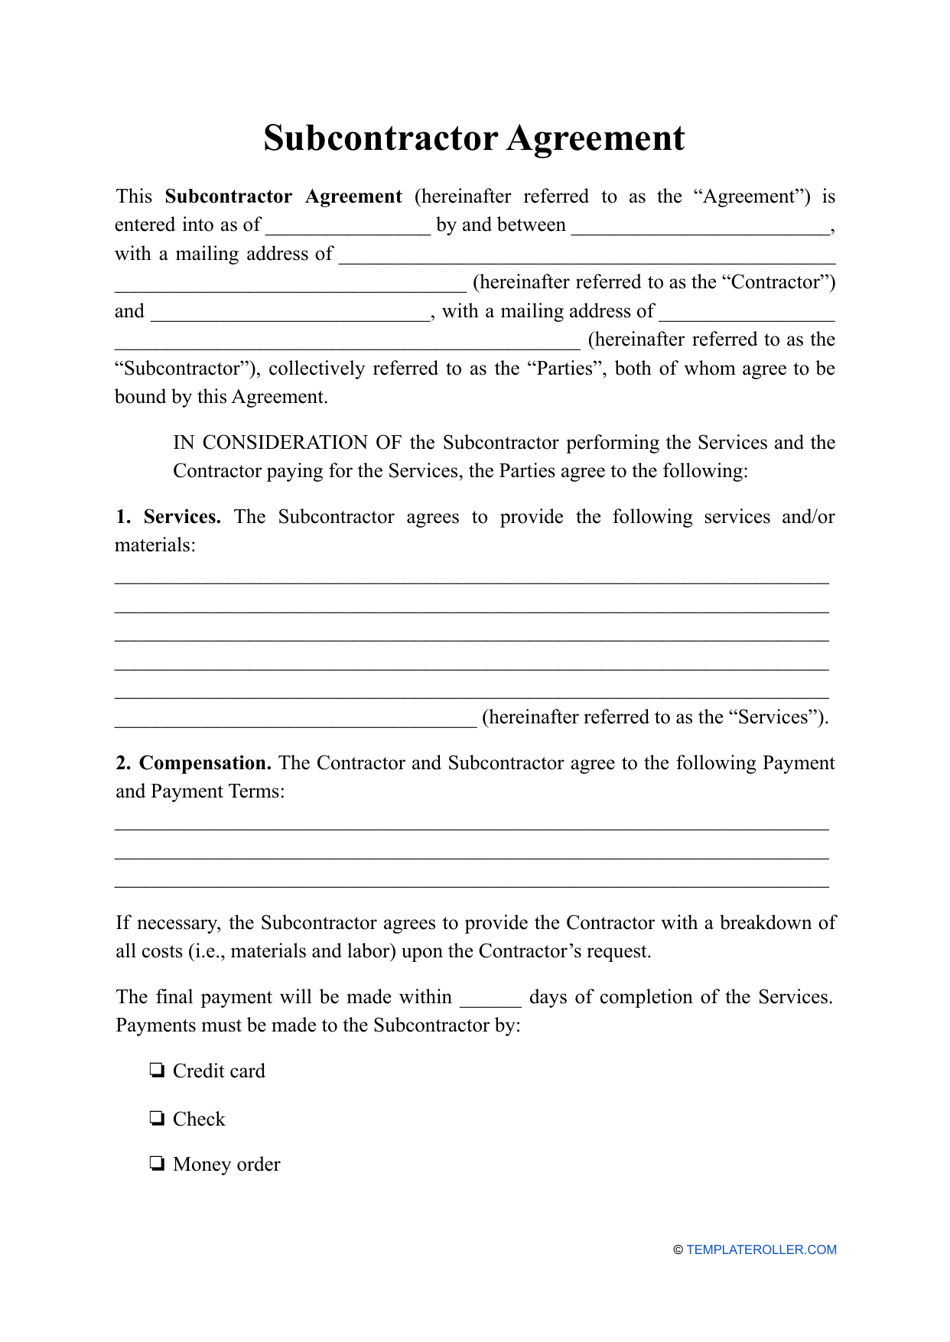 Subcontractor Agreement Template Fill Out Sign Online and Download